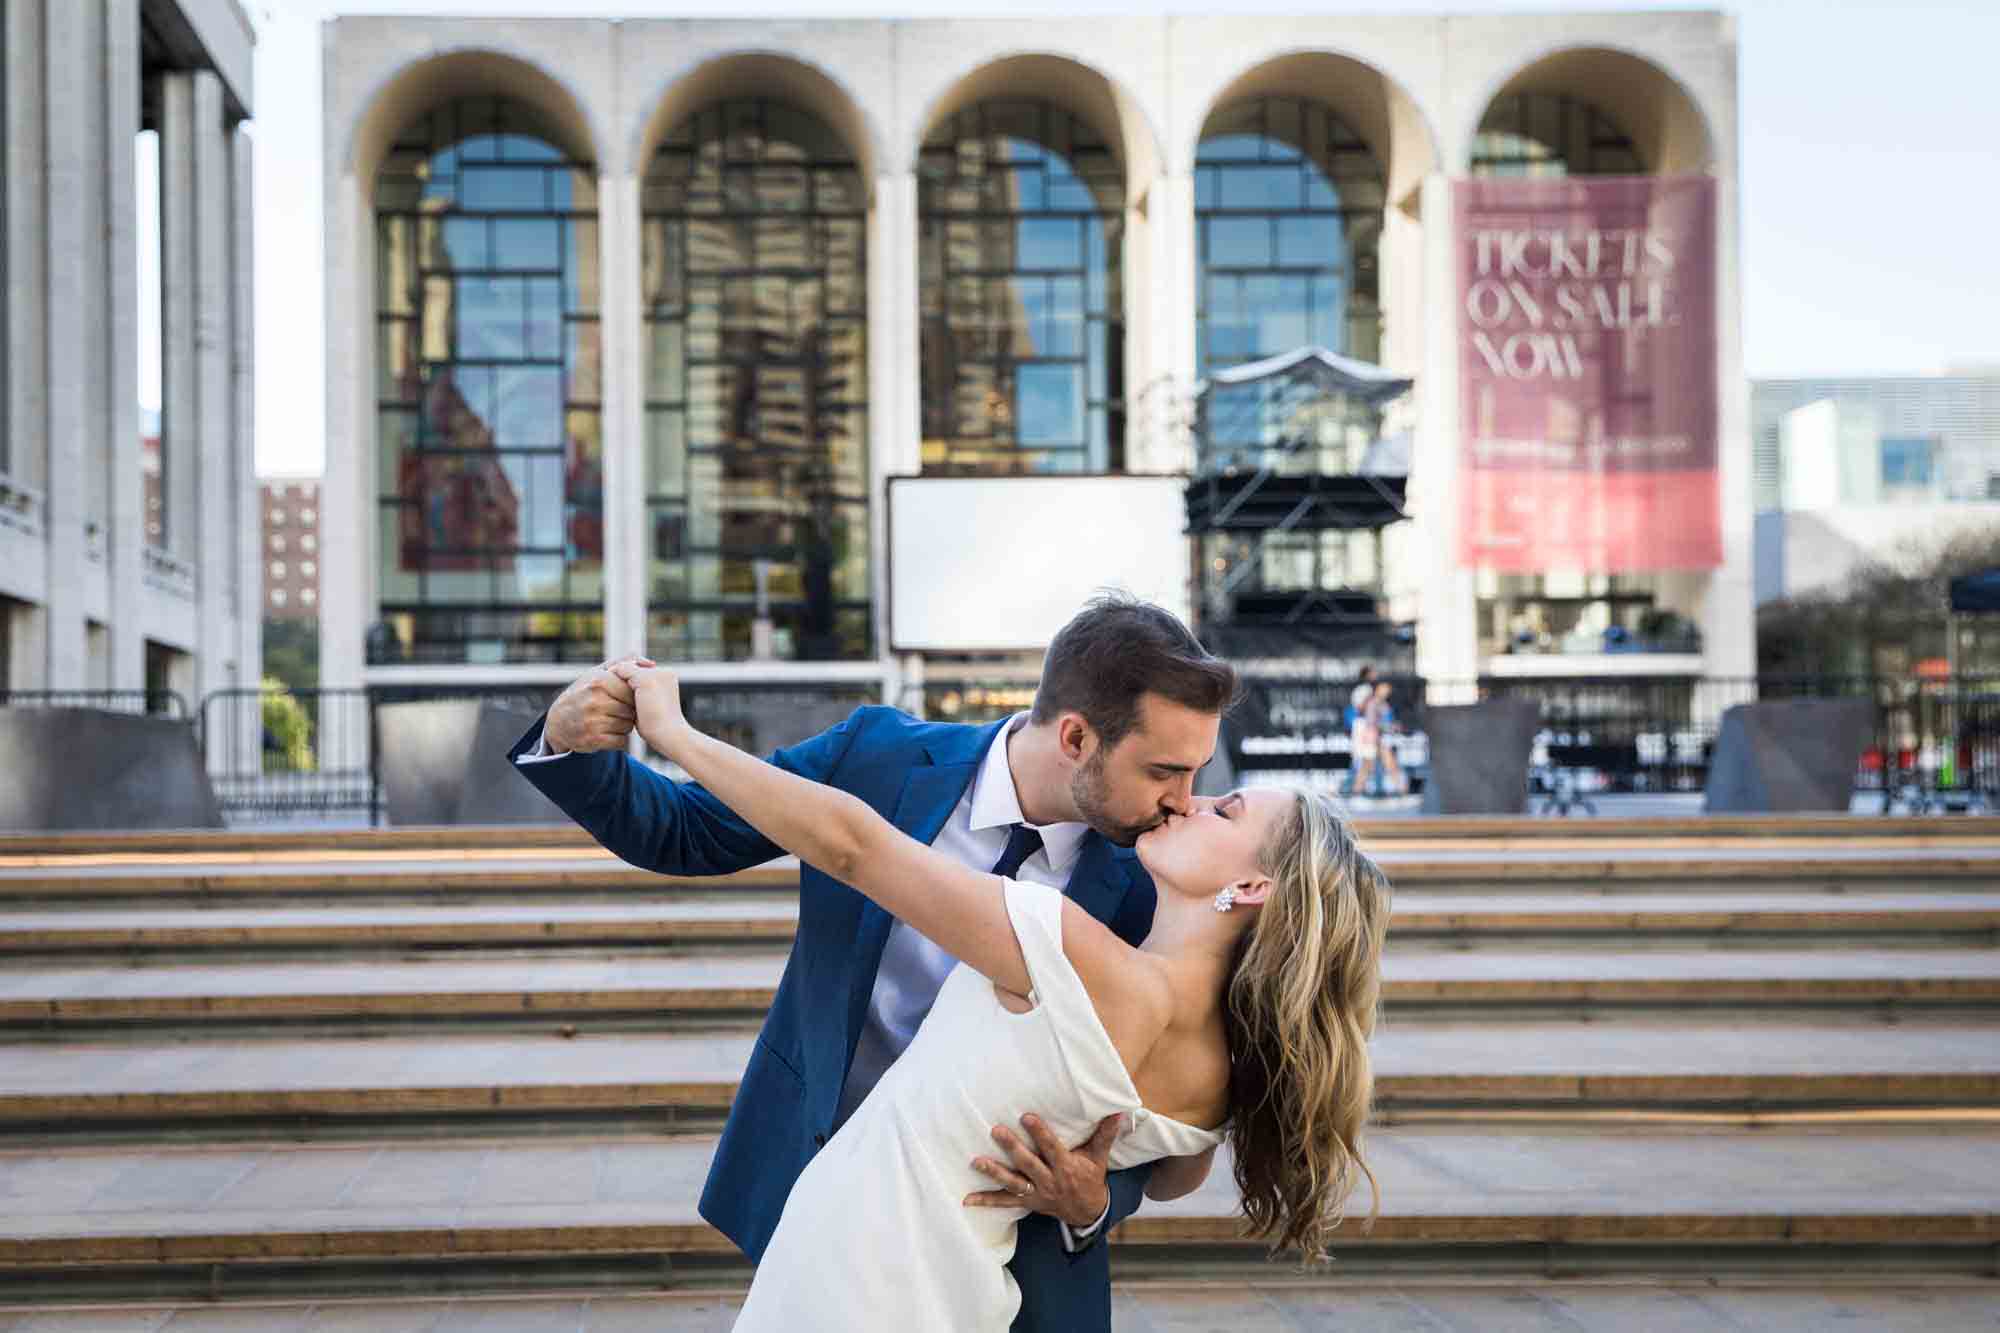 Groom kissing bride during dip in front of steps of Lincoln Plaza in NYC